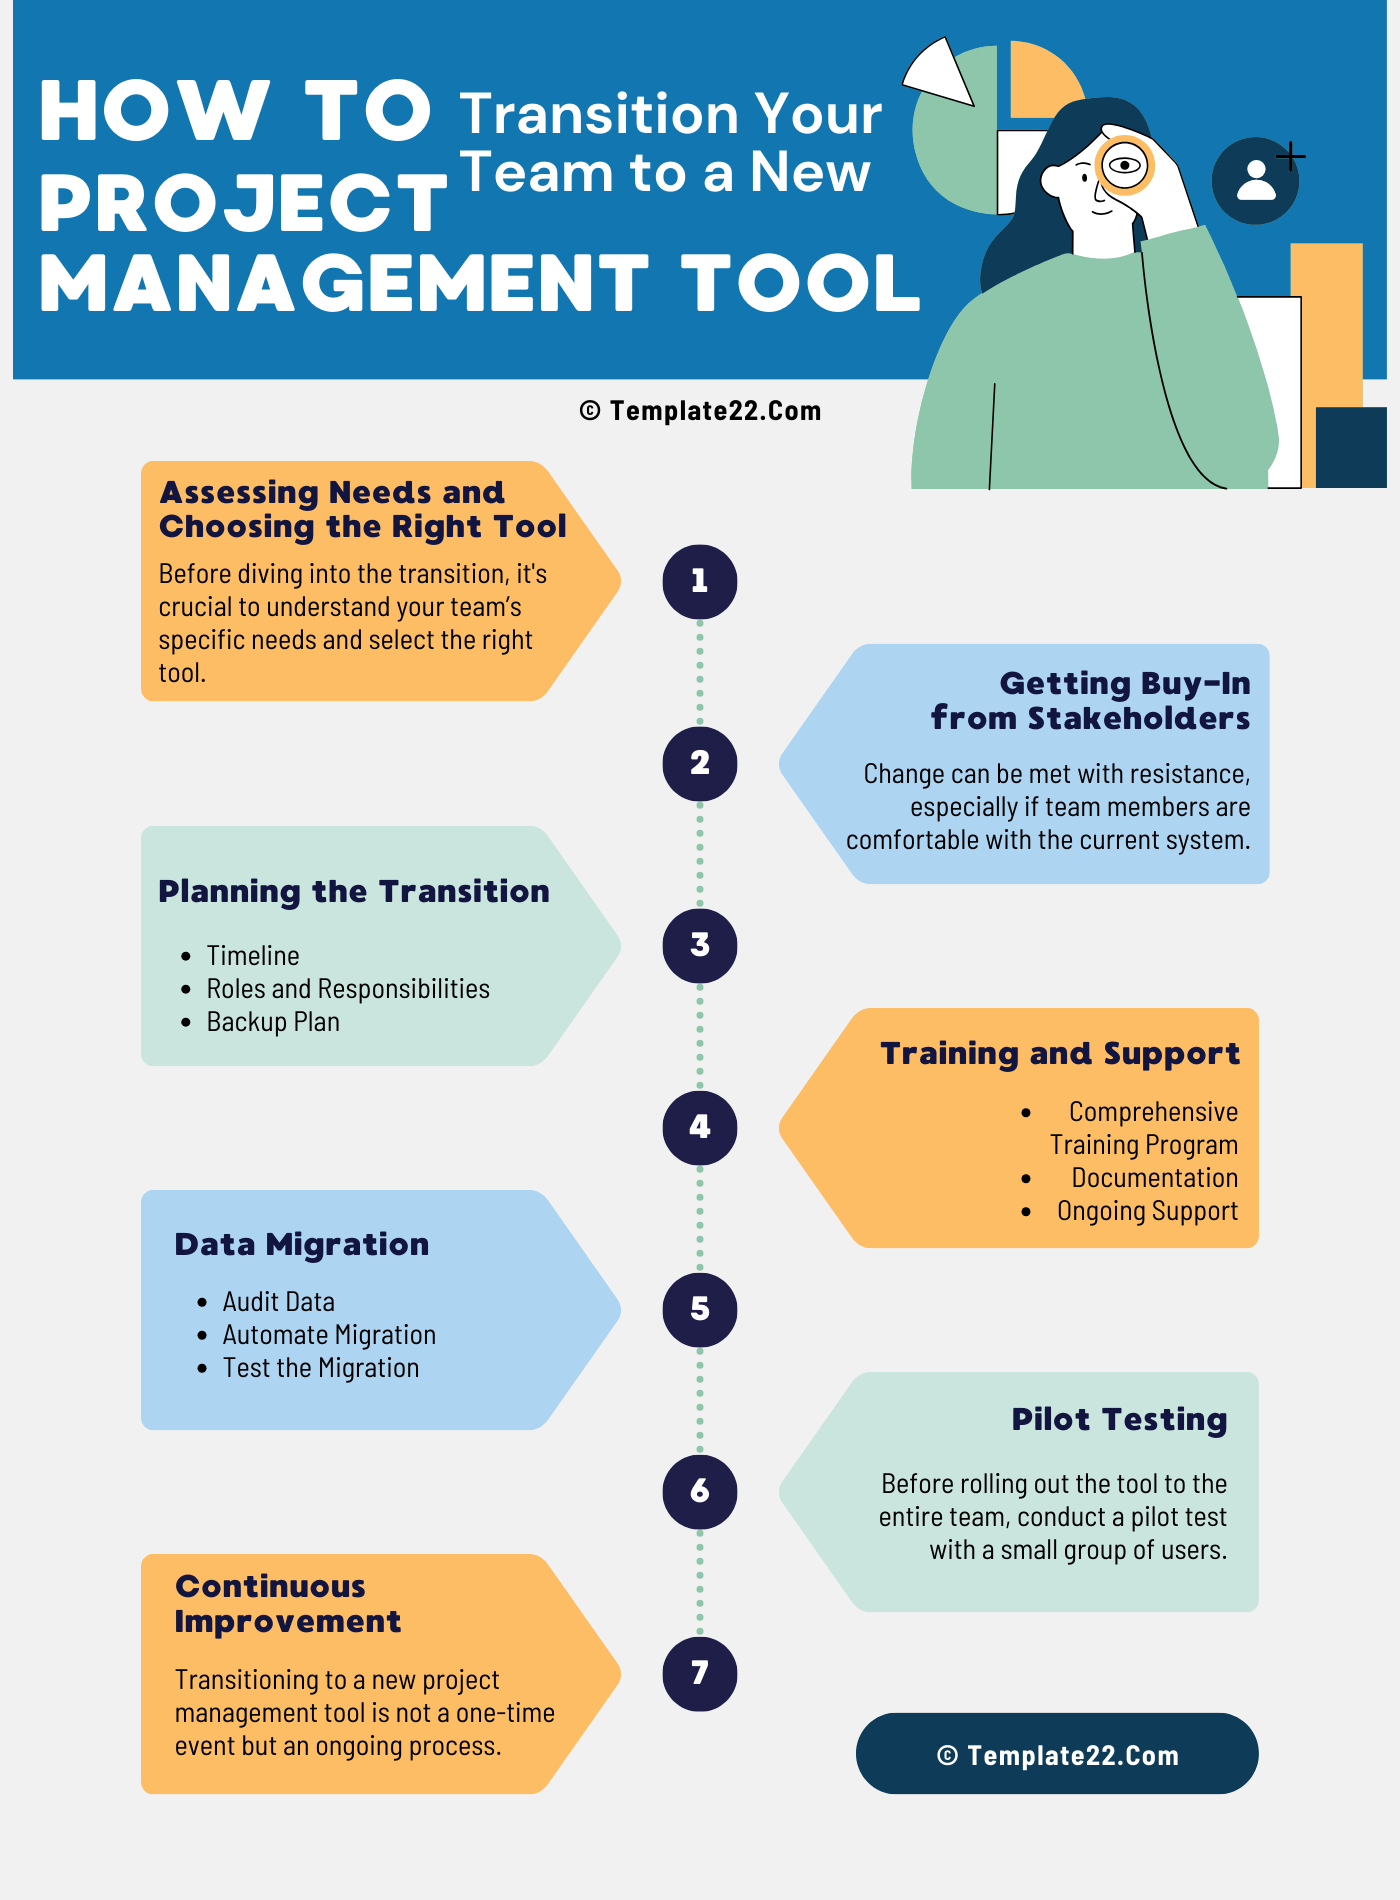 How to Transition Your Team to a New Project Management Tool